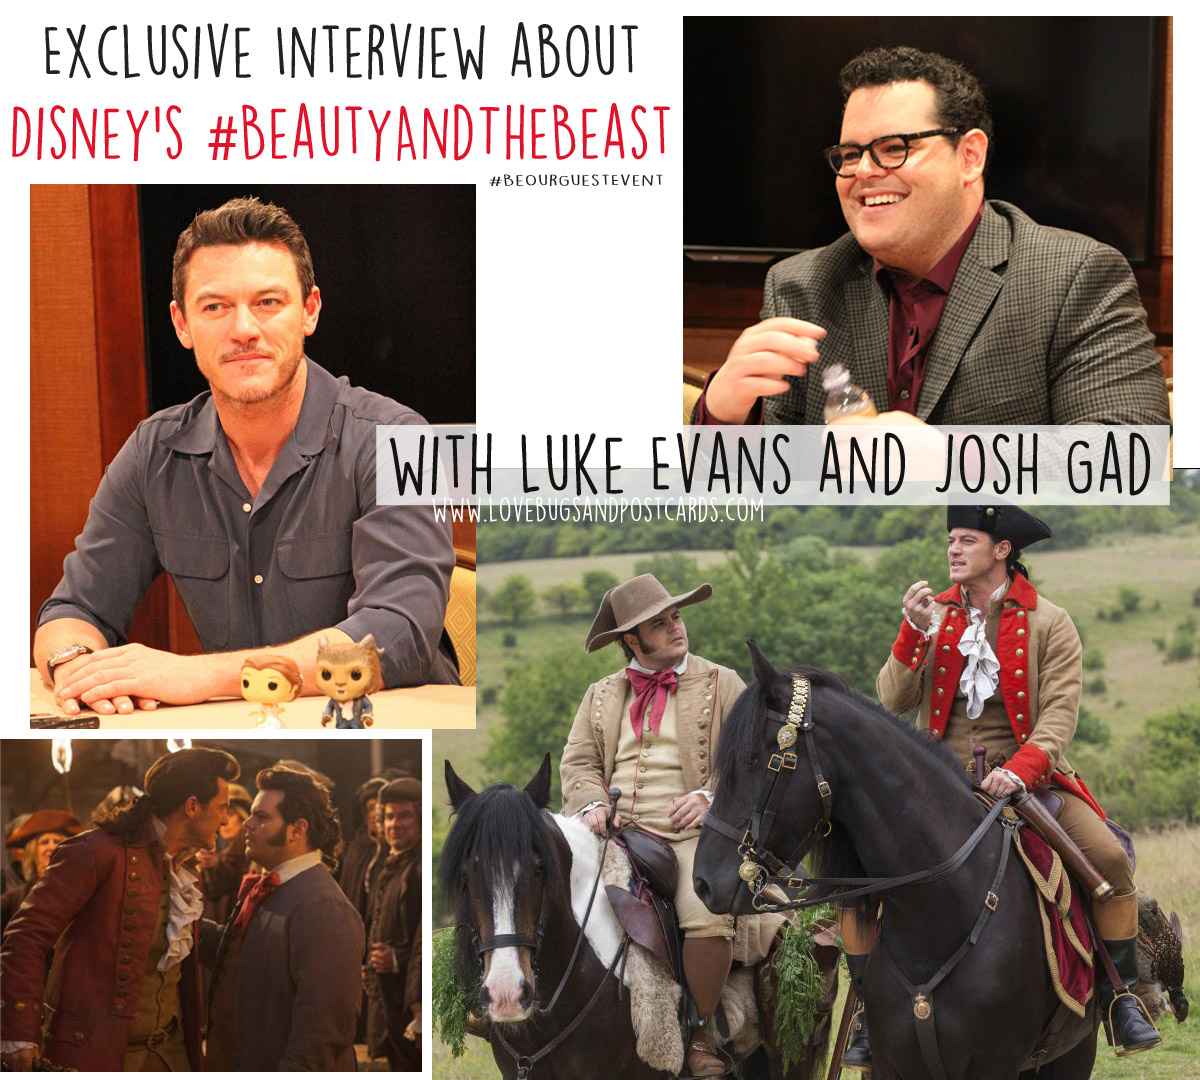 Exclusive Interview with Luke Evans and Josh Gad about Disney's #BeautyAndTheBeast #BeOurGuestEvent